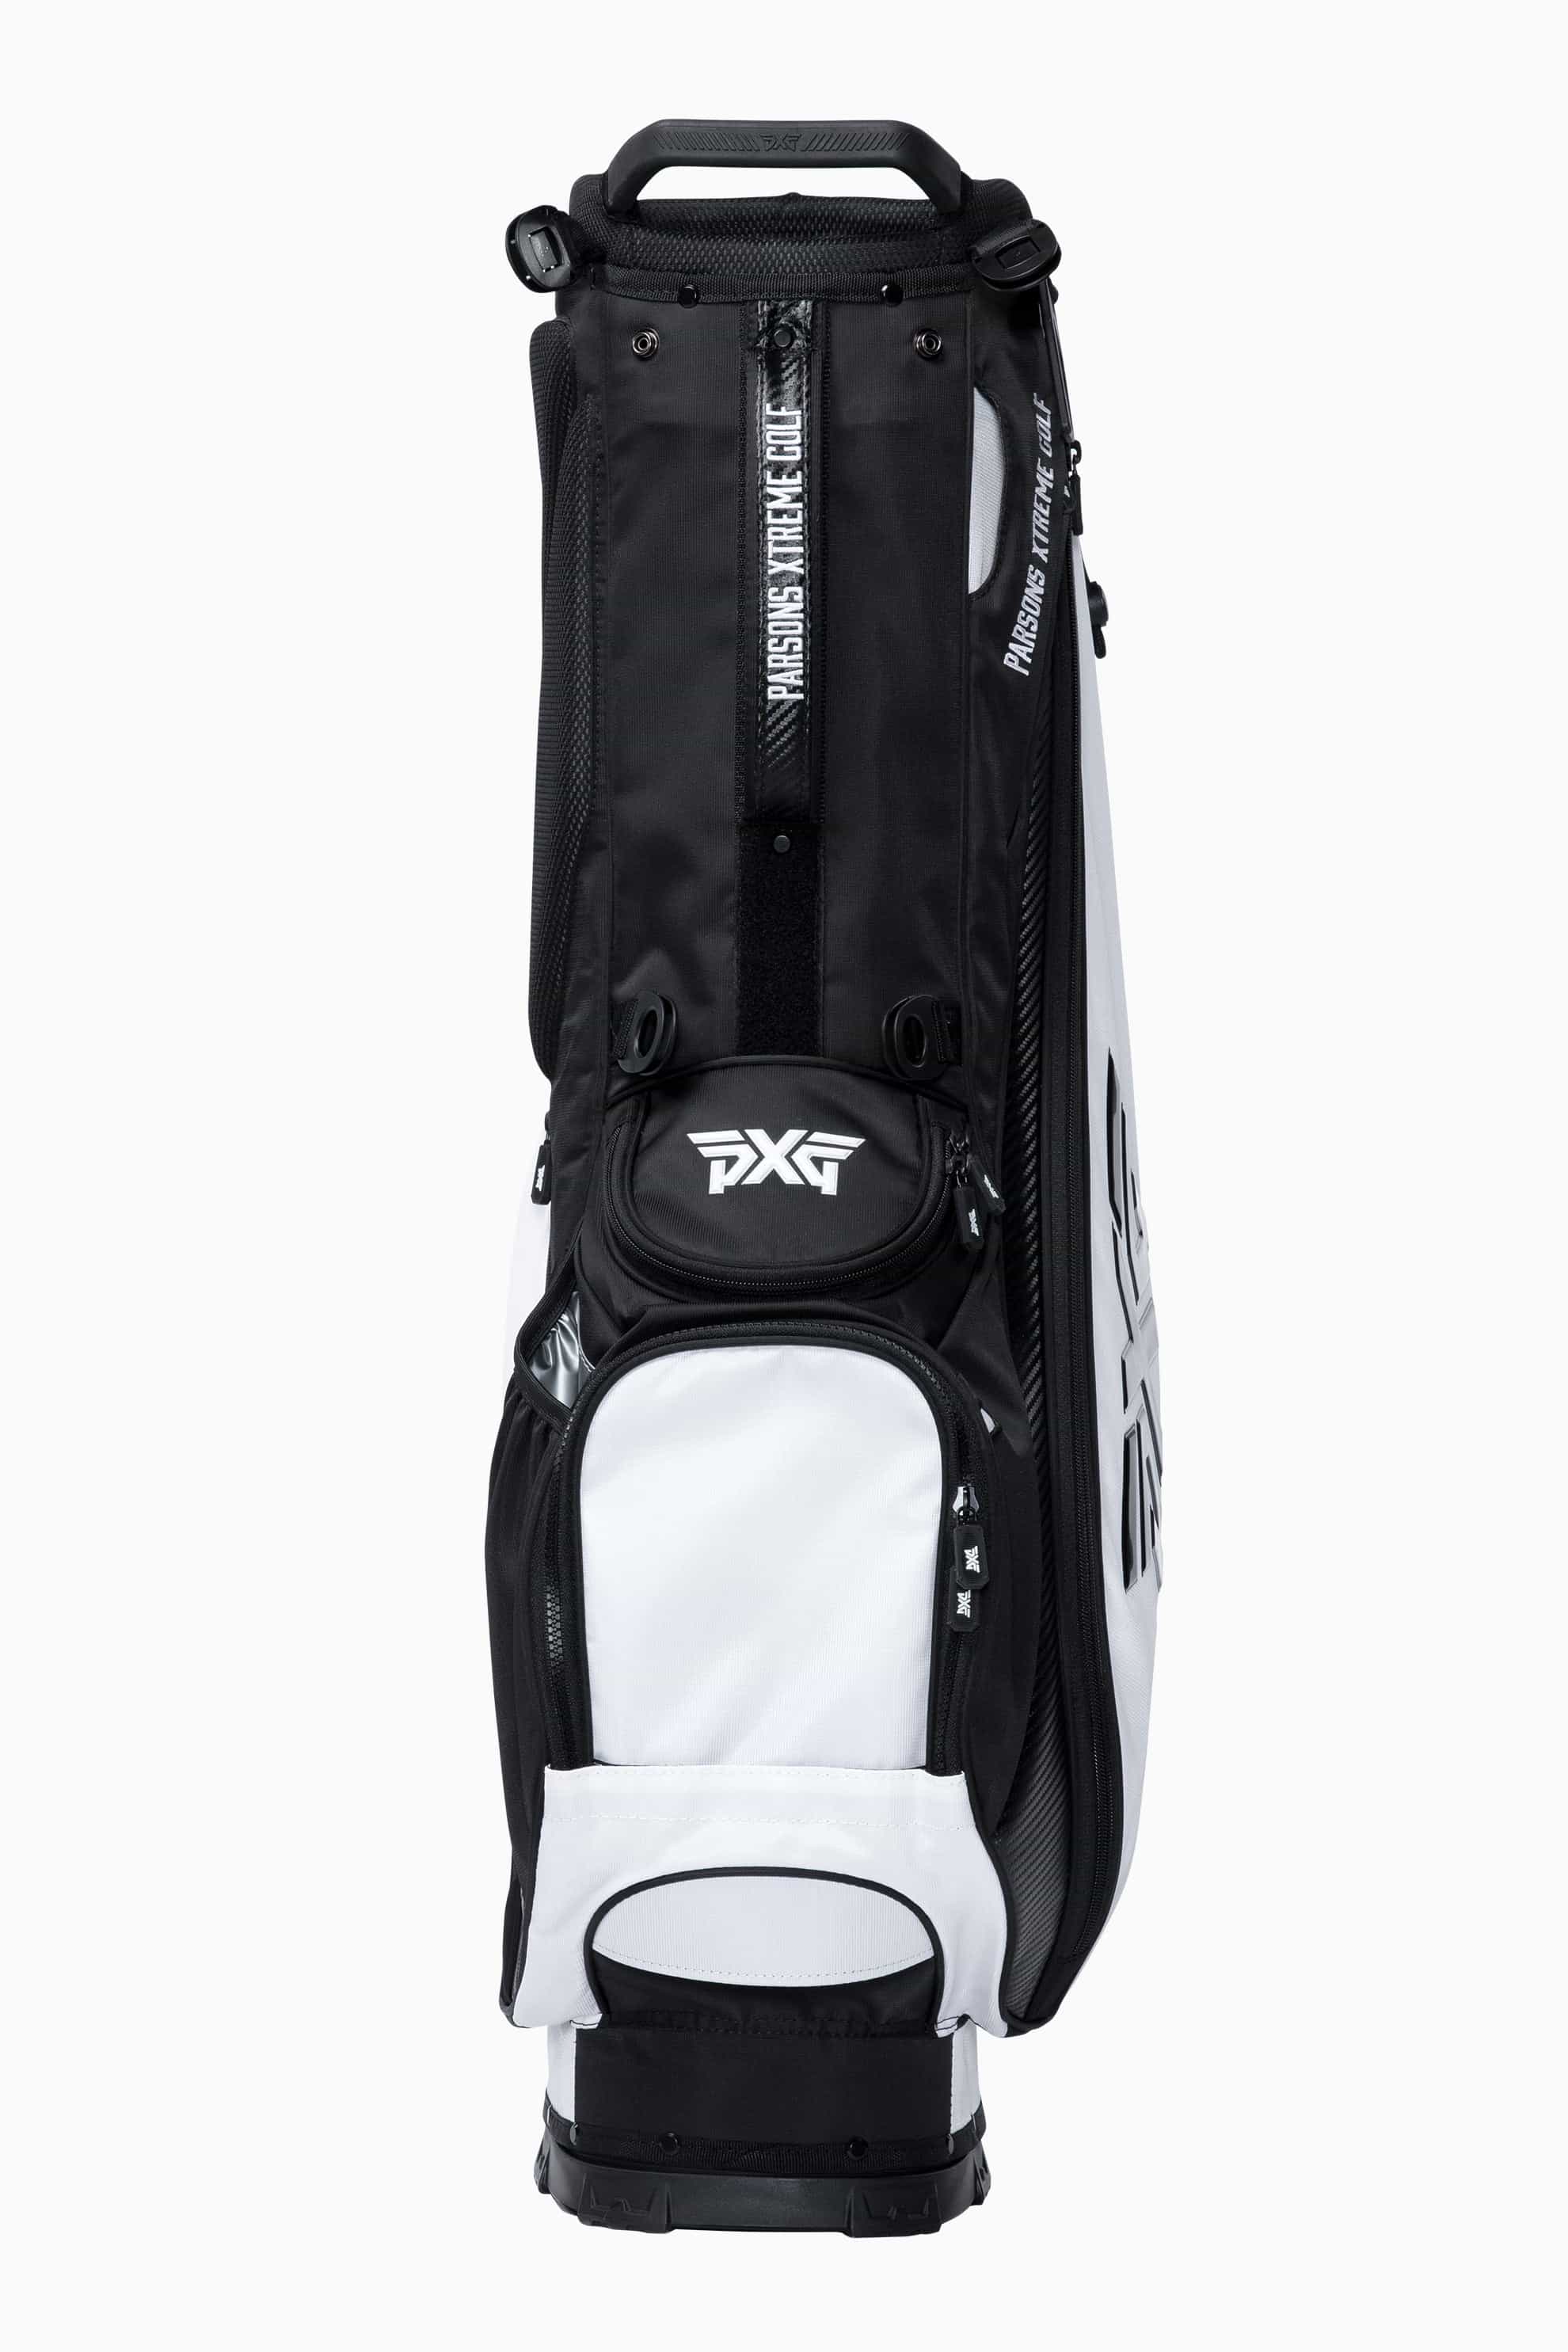 LIghtweight Carry Stand Bag  Shop the Highest Quality Golf Apparel, Gear,  Accessories and Golf Clubs at PXG